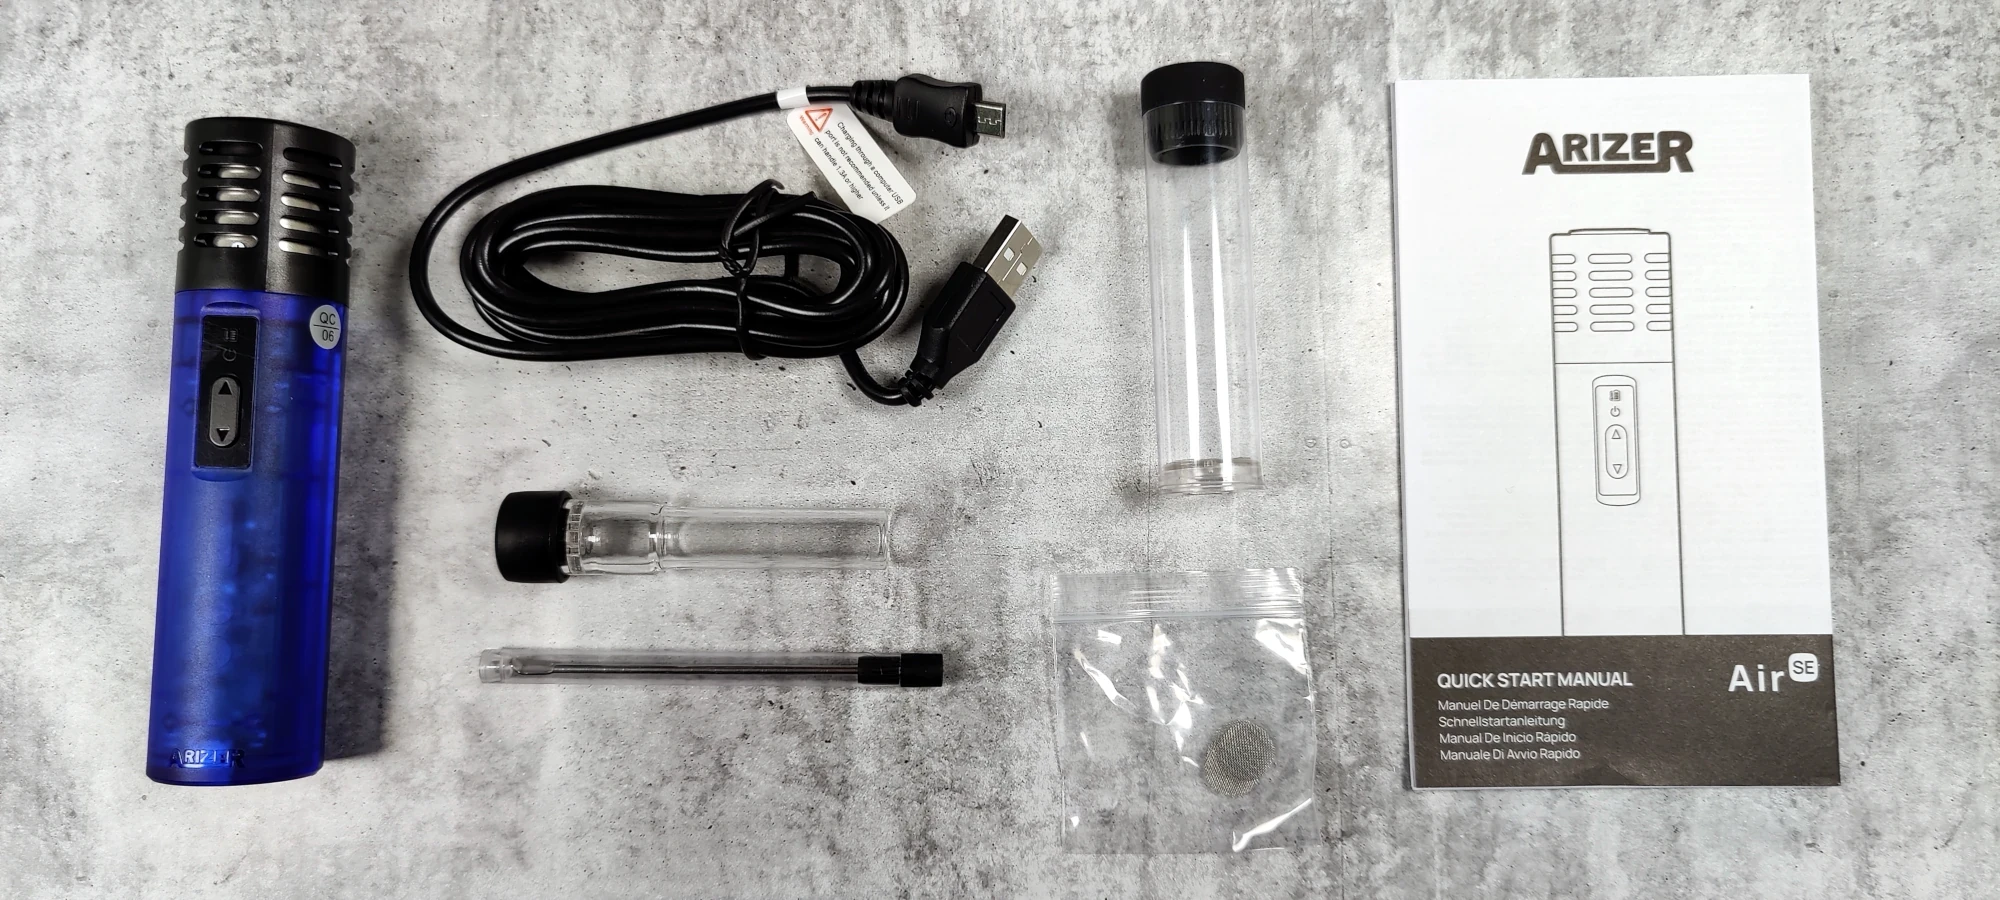 Arizer Air SE package contents